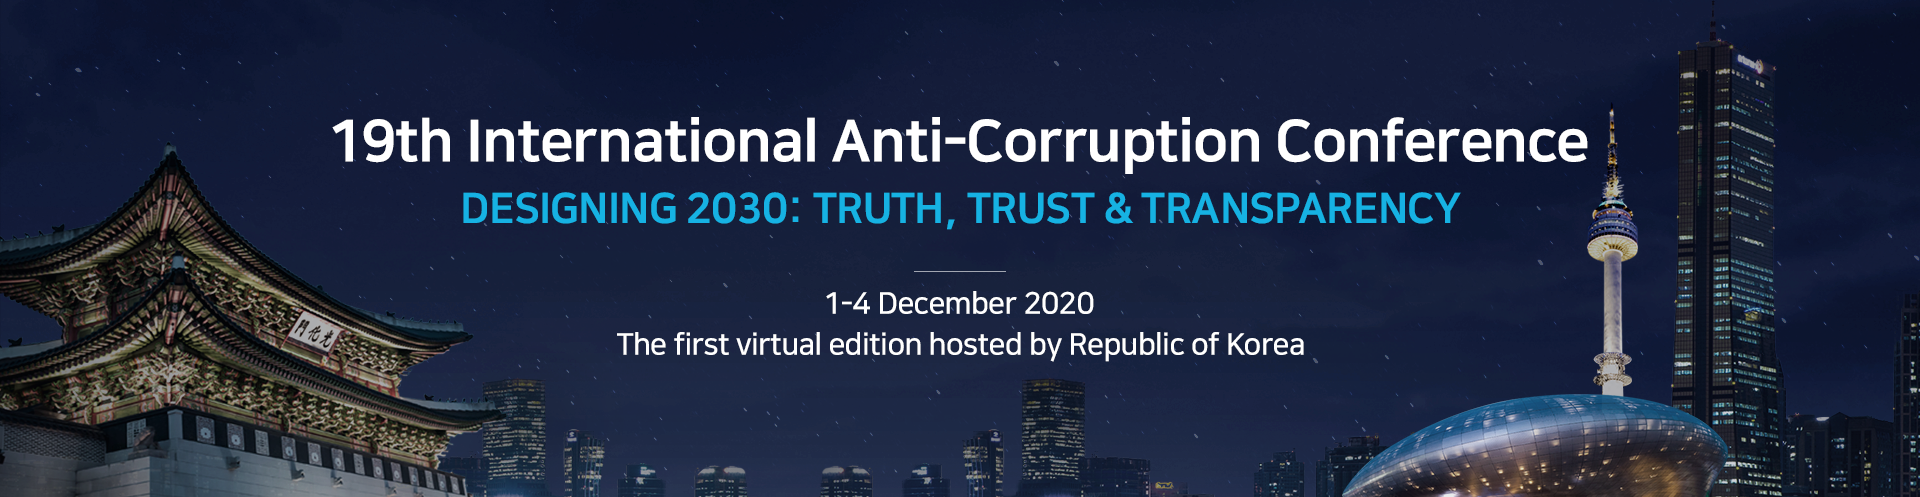 The ACRC, together with the TI, is holding the first virtual edition of the International Anti-Corruption Conference (IACC) on December 1-4, 2020 (extended date : Nov. 30 - Dec. 5).